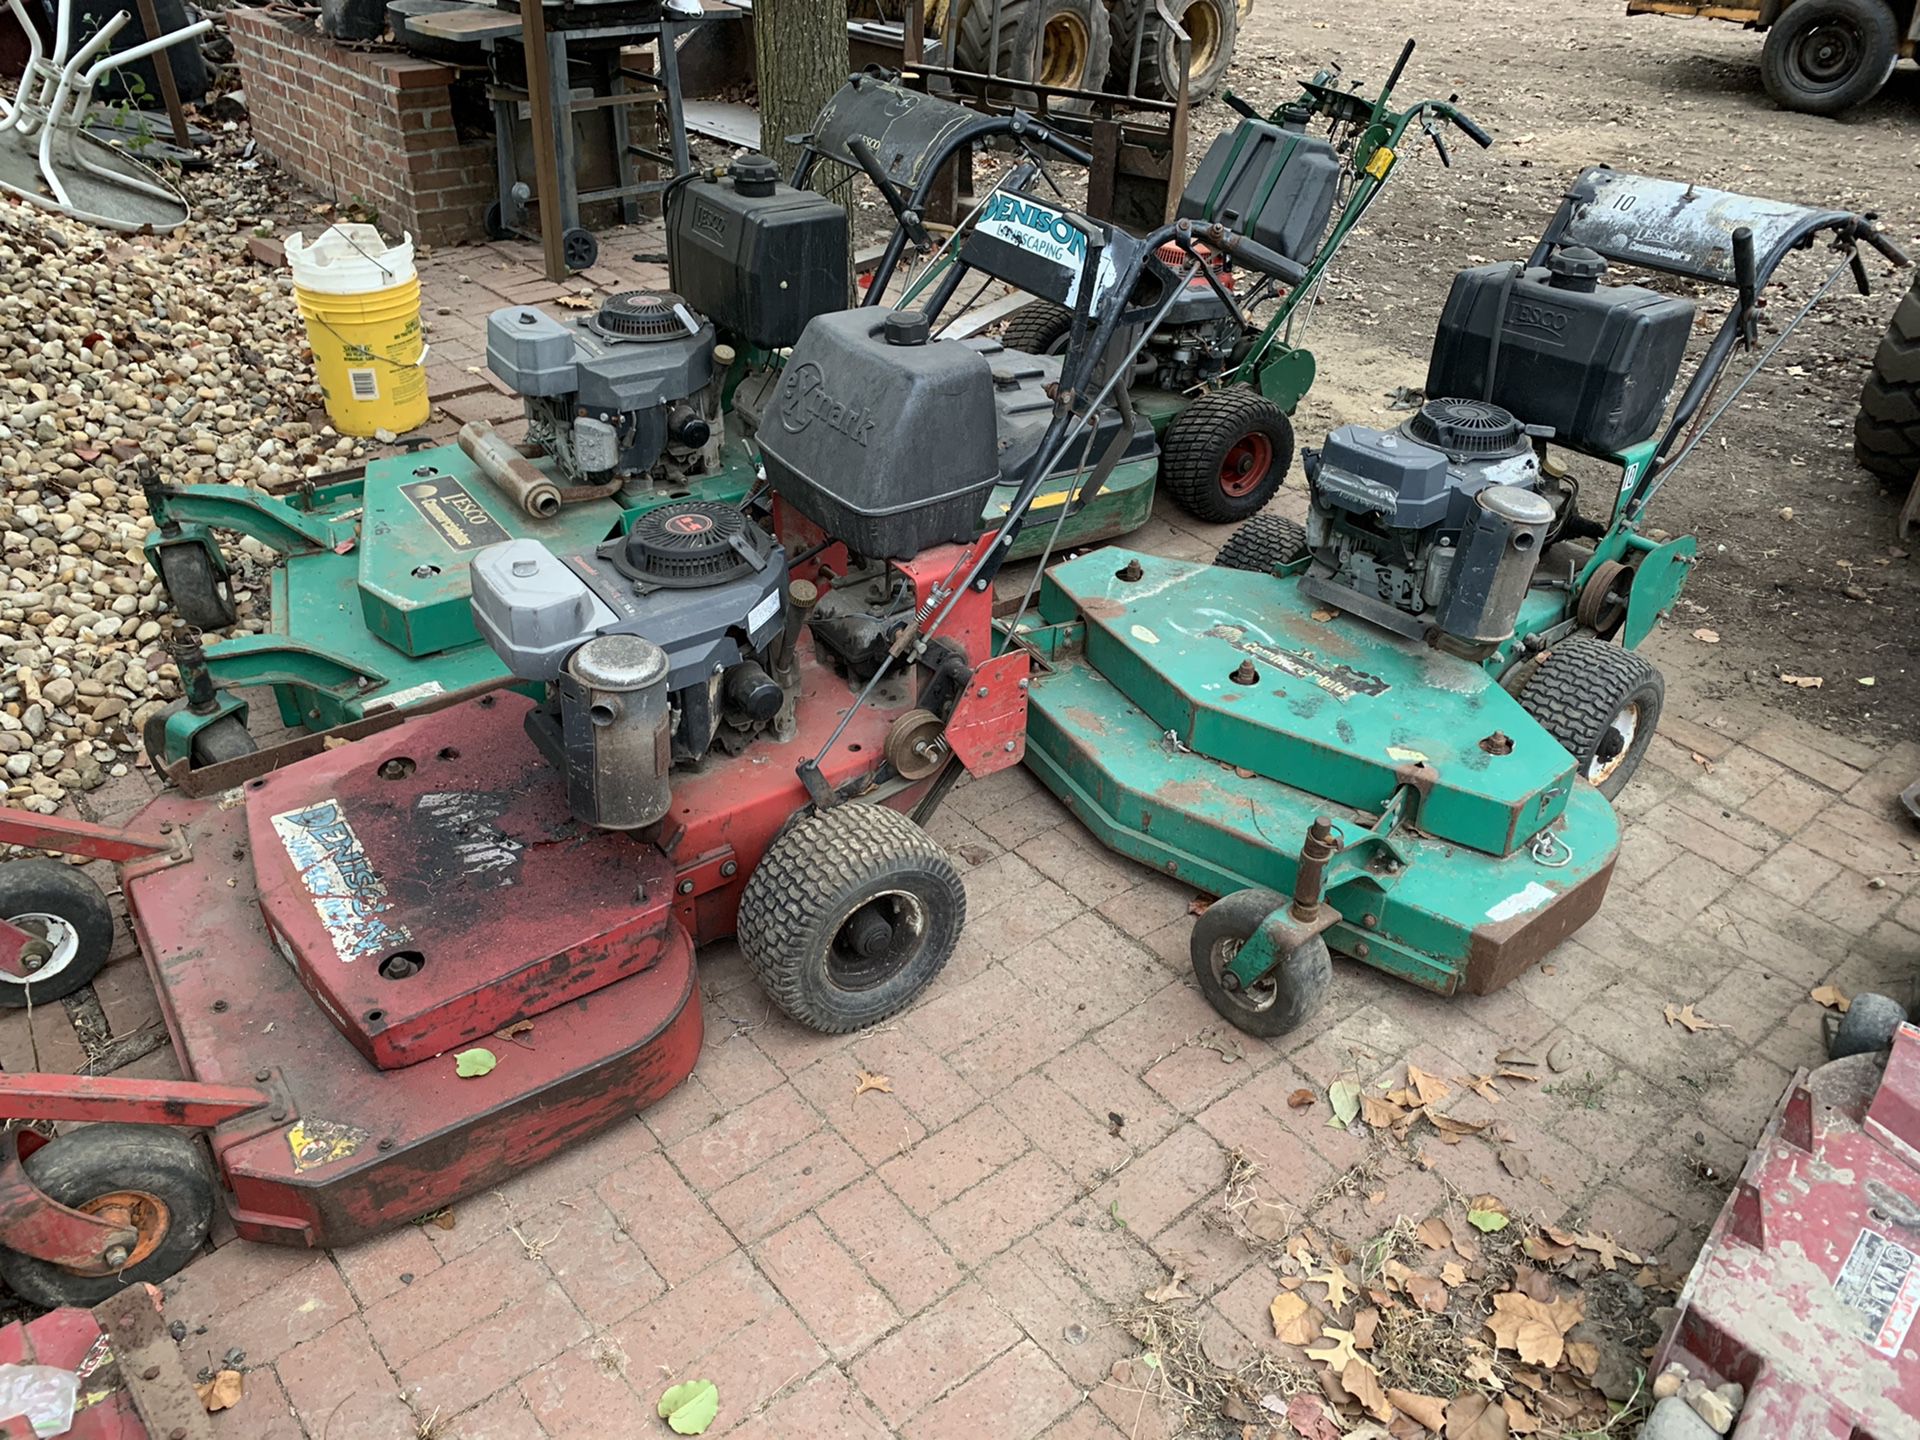 Misc commercial lawn mowers